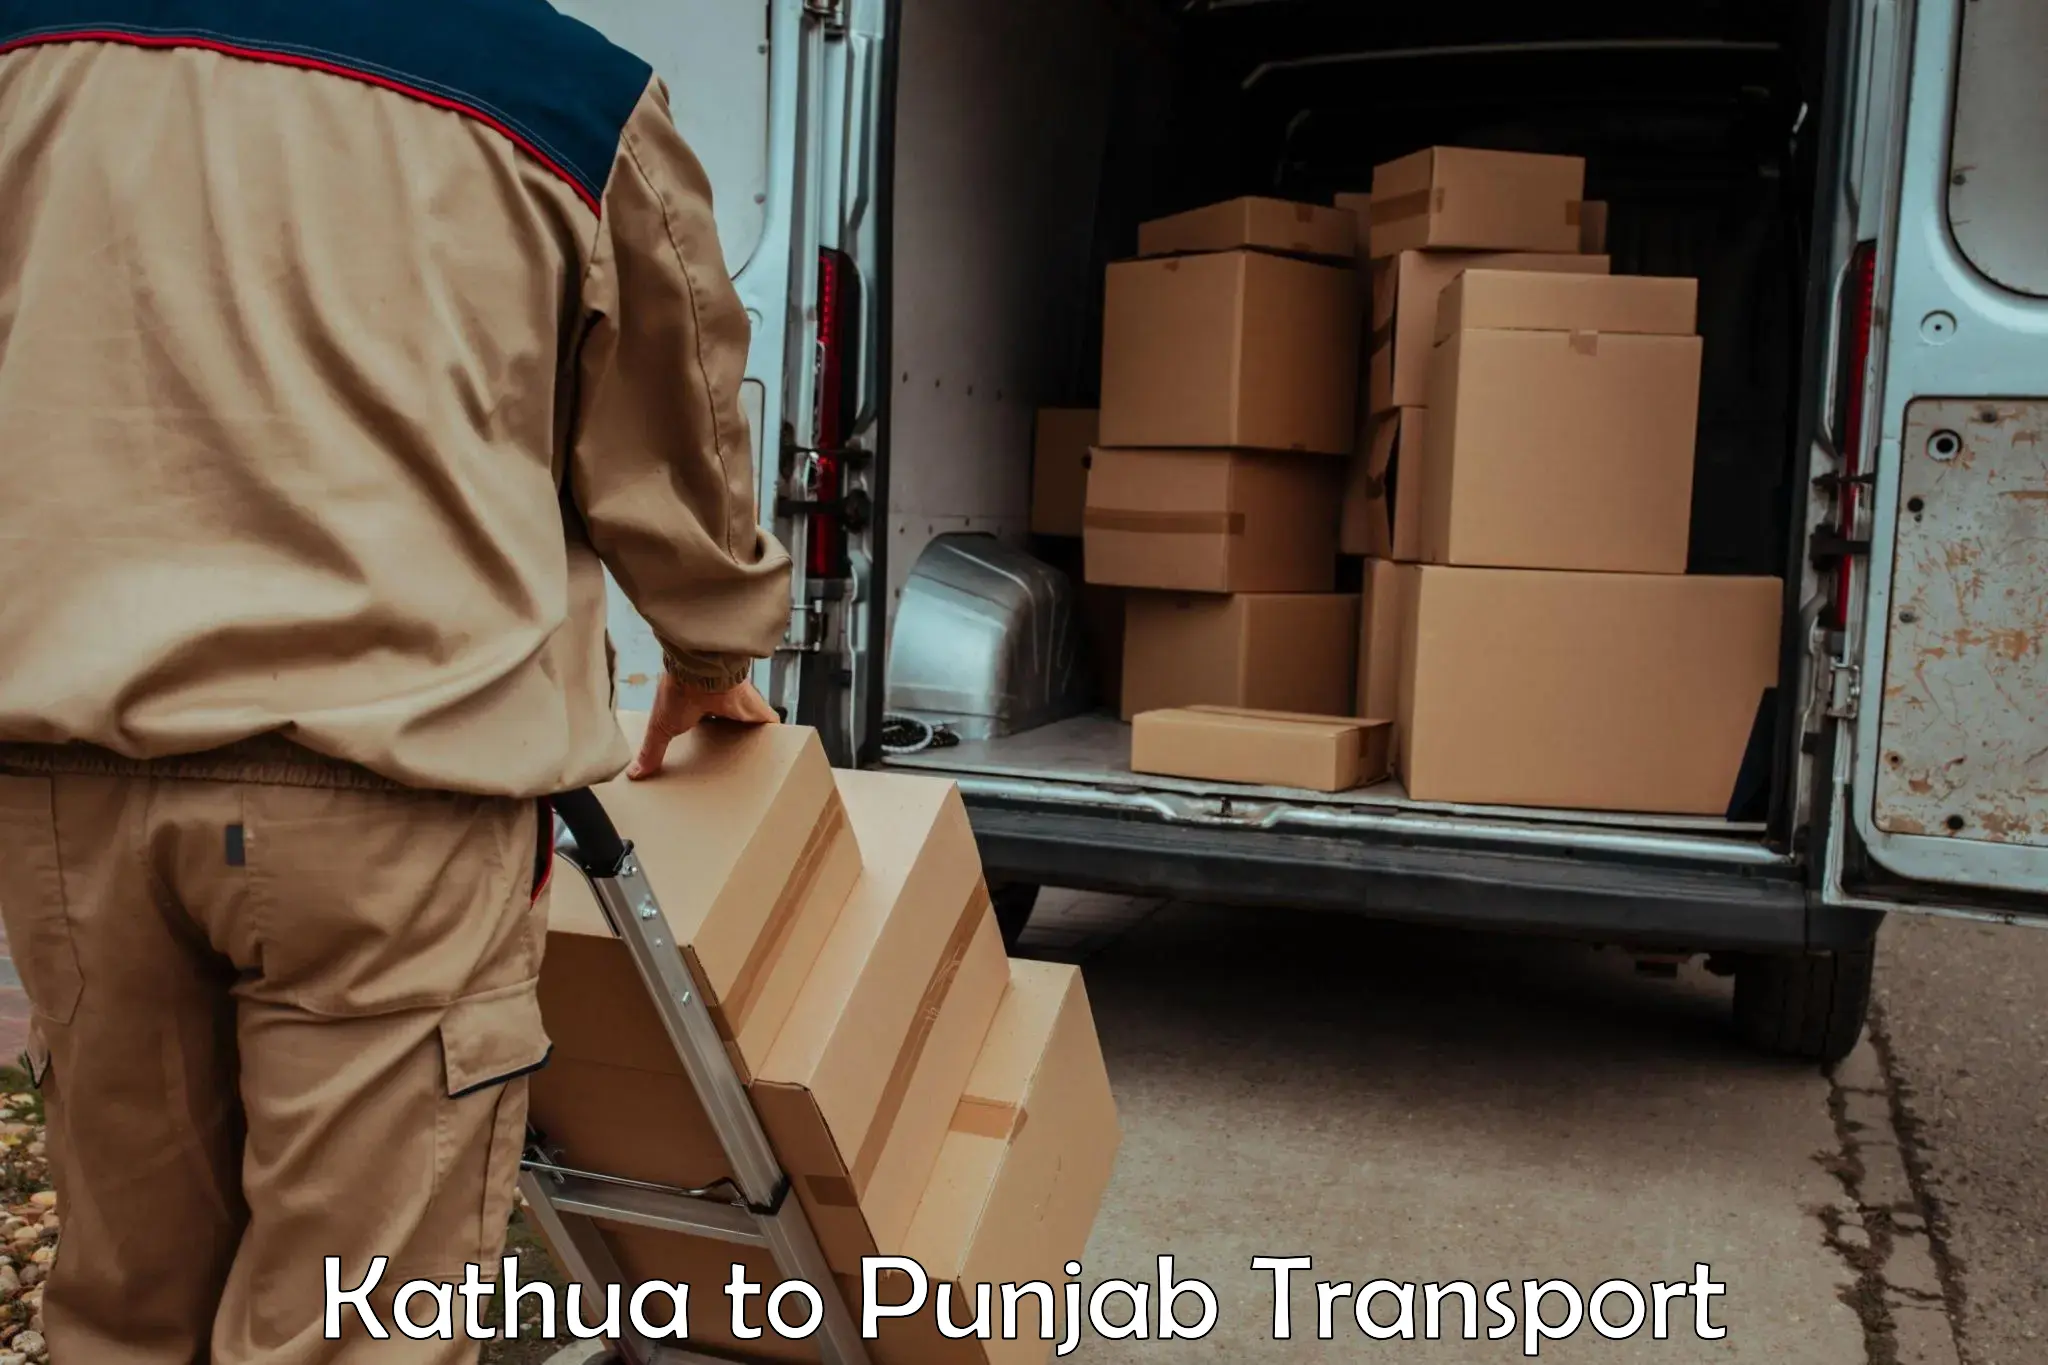 Goods delivery service Kathua to Amritsar